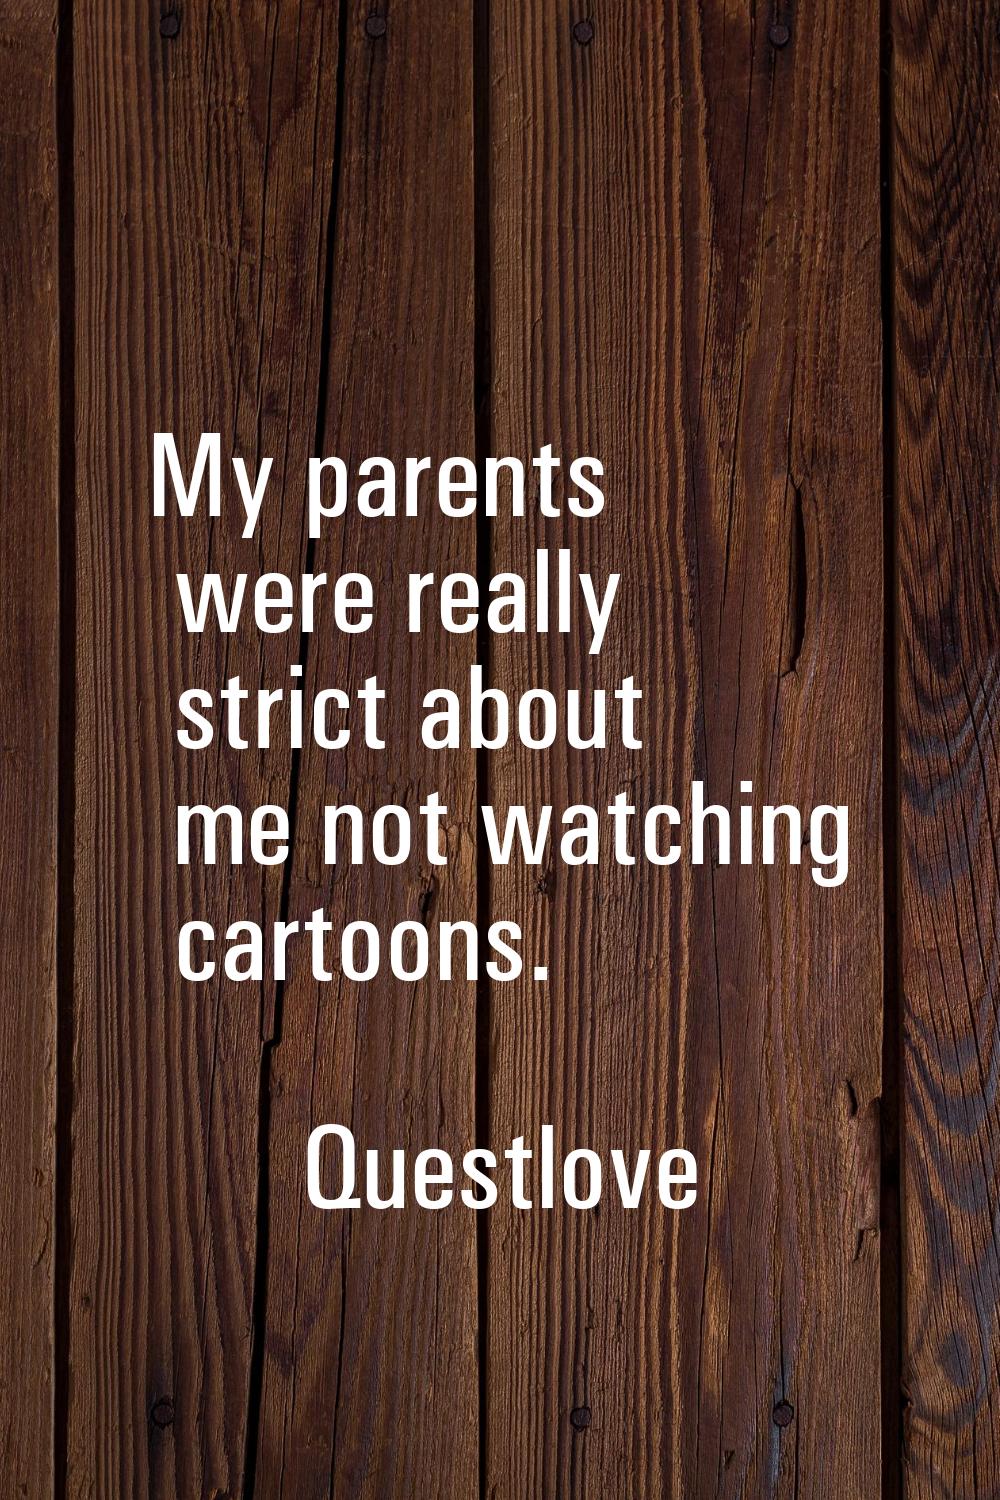 My parents were really strict about me not watching cartoons.